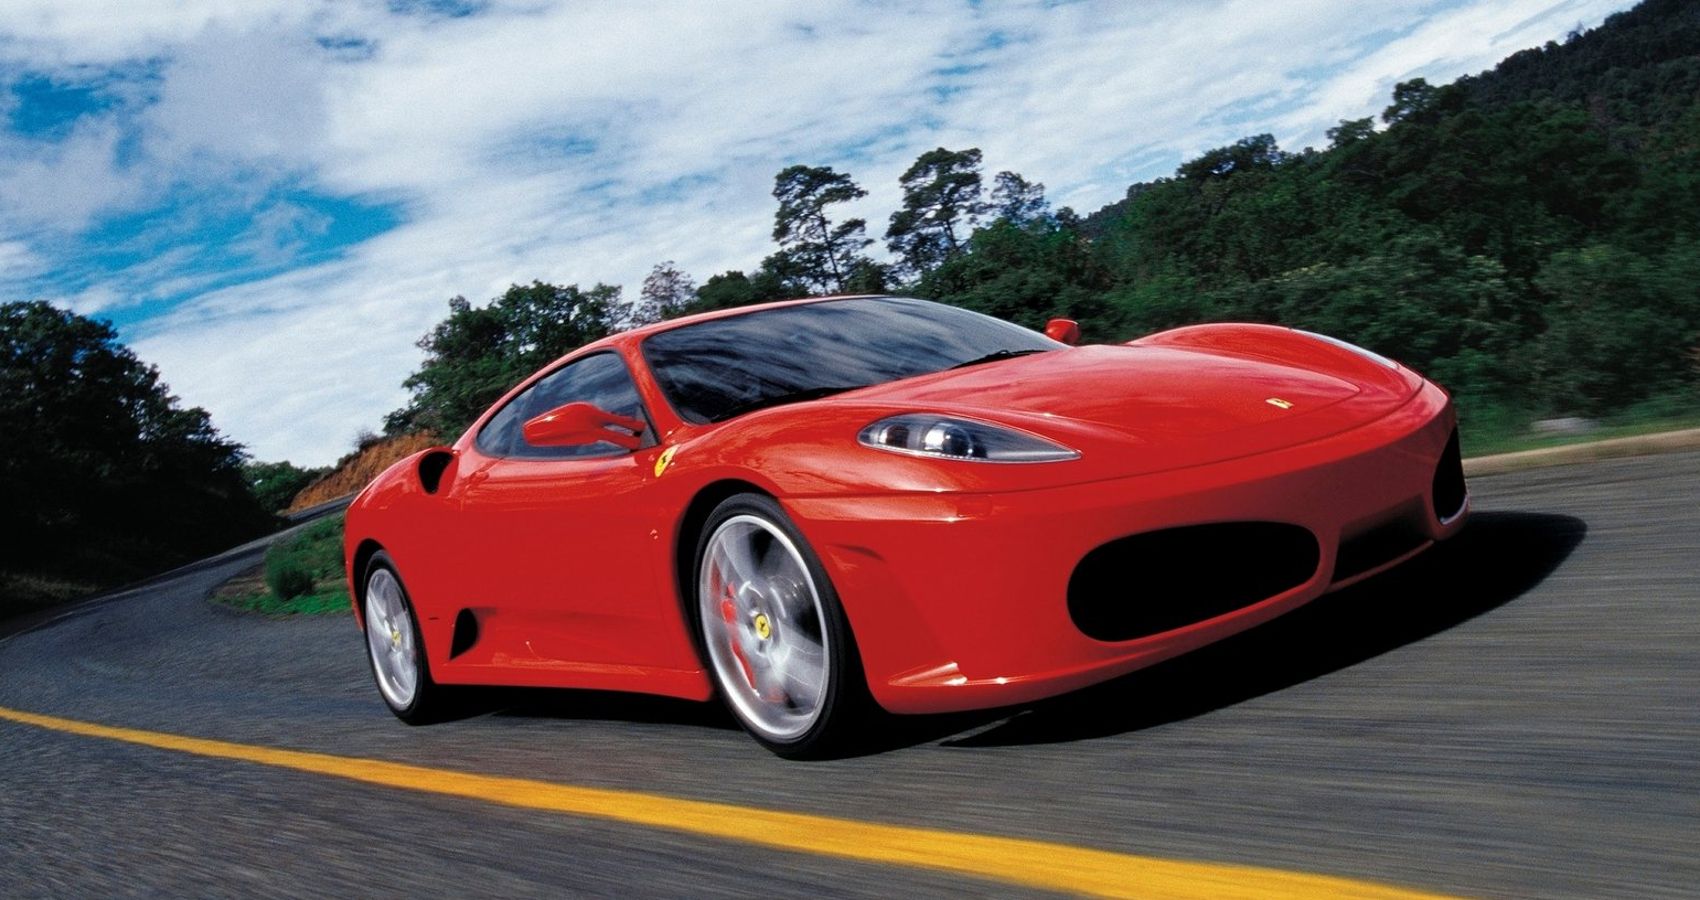 Front 3/4 view of a red F430 on the move